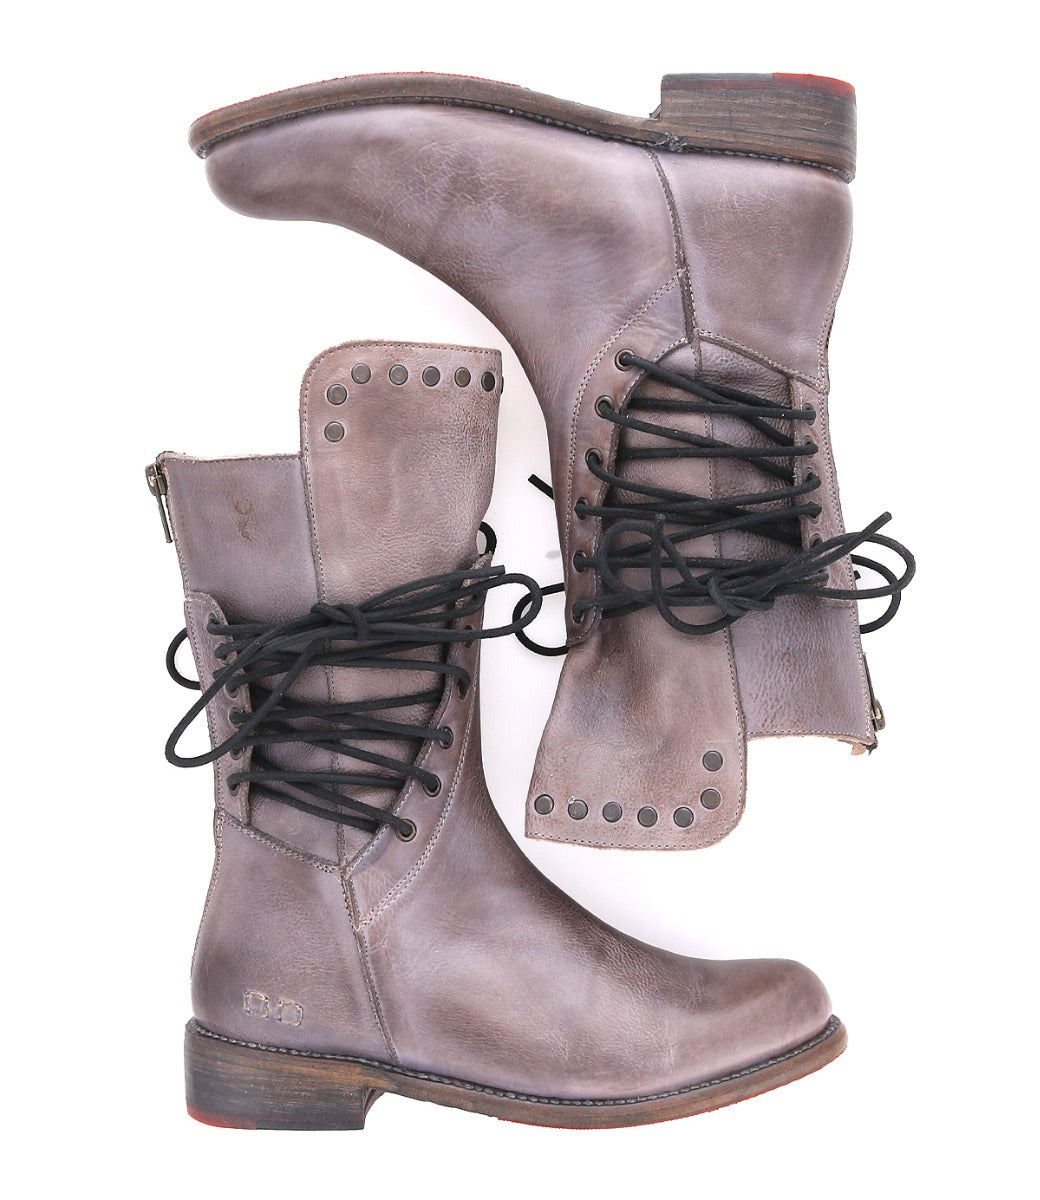 A pair of Fen grey leather boots with laces by Bed Stu.